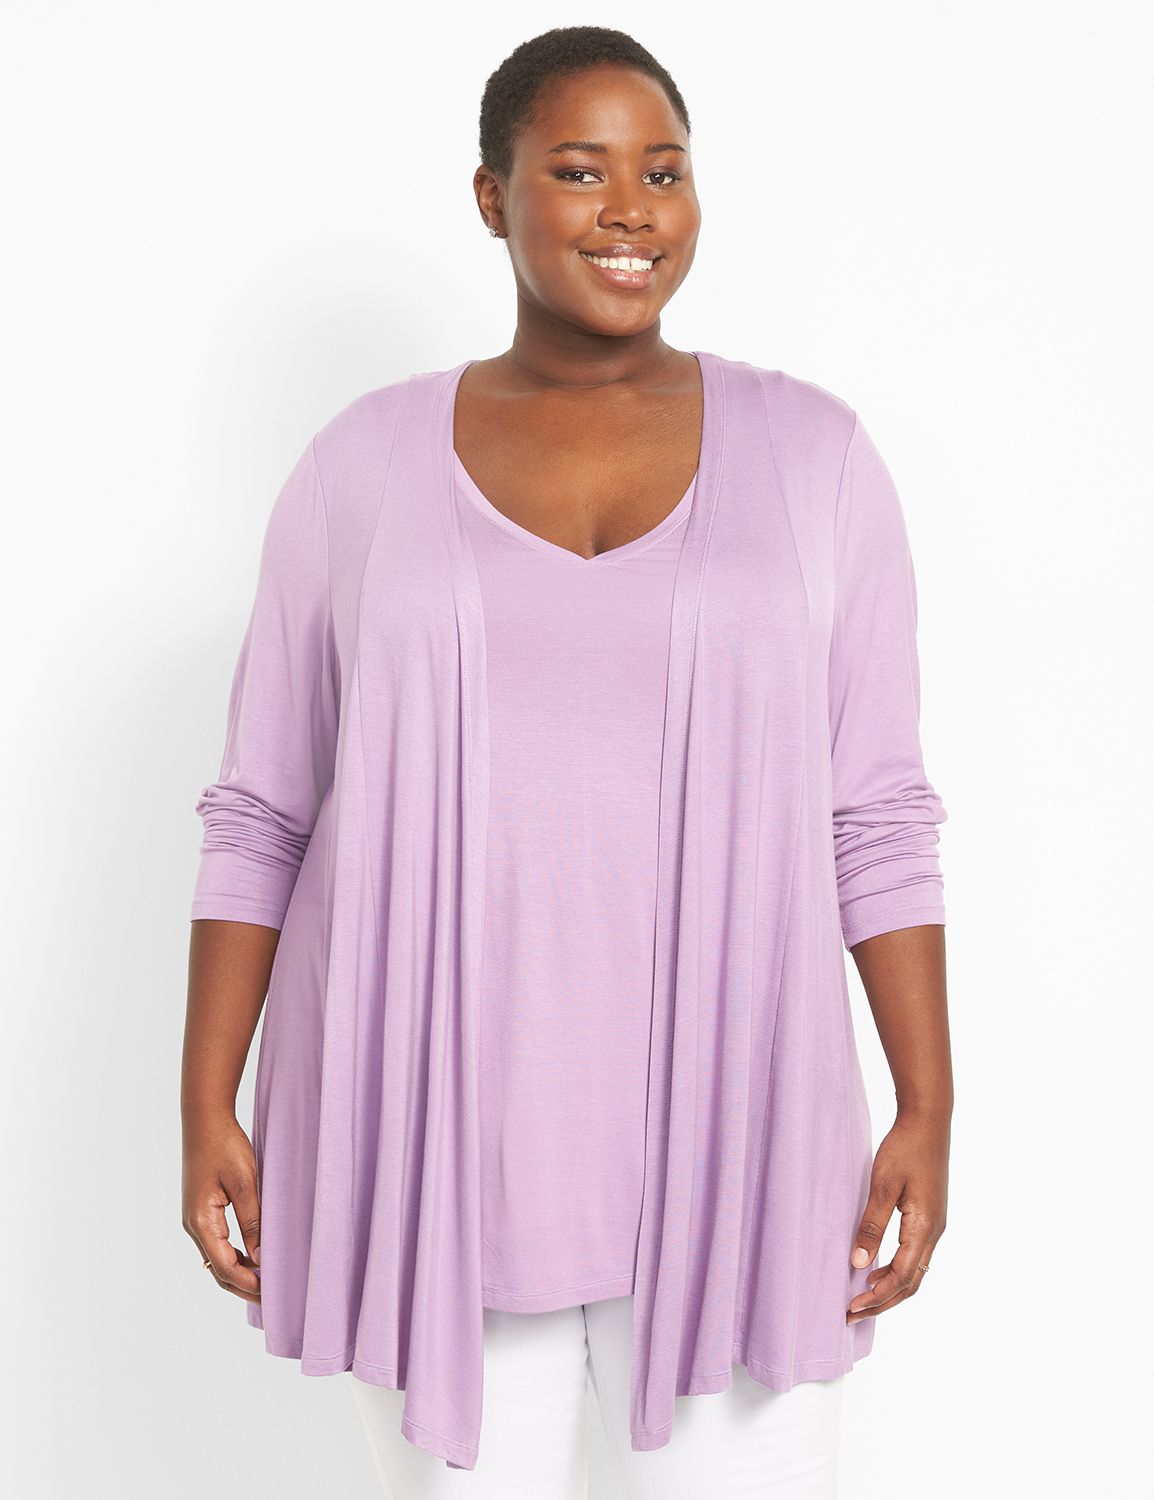 Long Sleeve Open Front Fit And Flar | LaneBryant